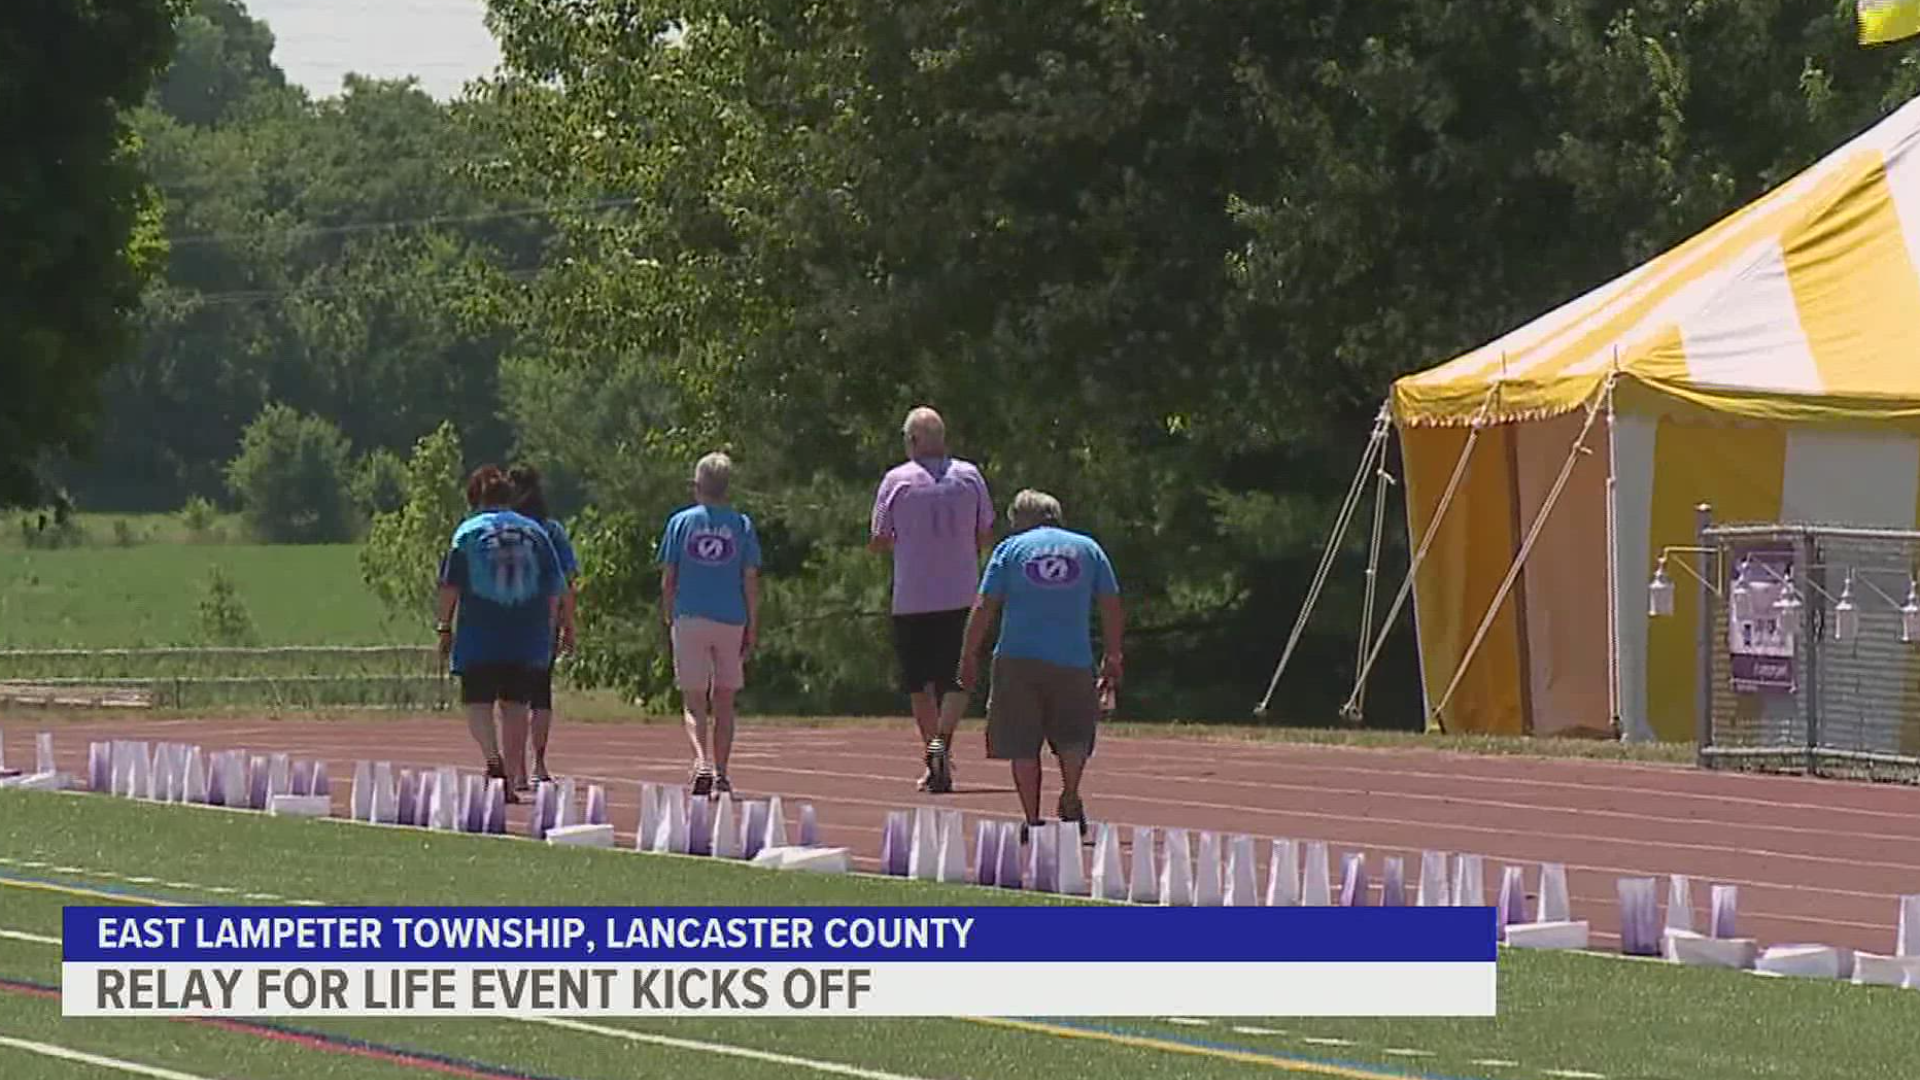 Participants gathered at Conestoga Valley High School for Lancaster County's Relay For Life, joining communities together and raising money for cancer research.